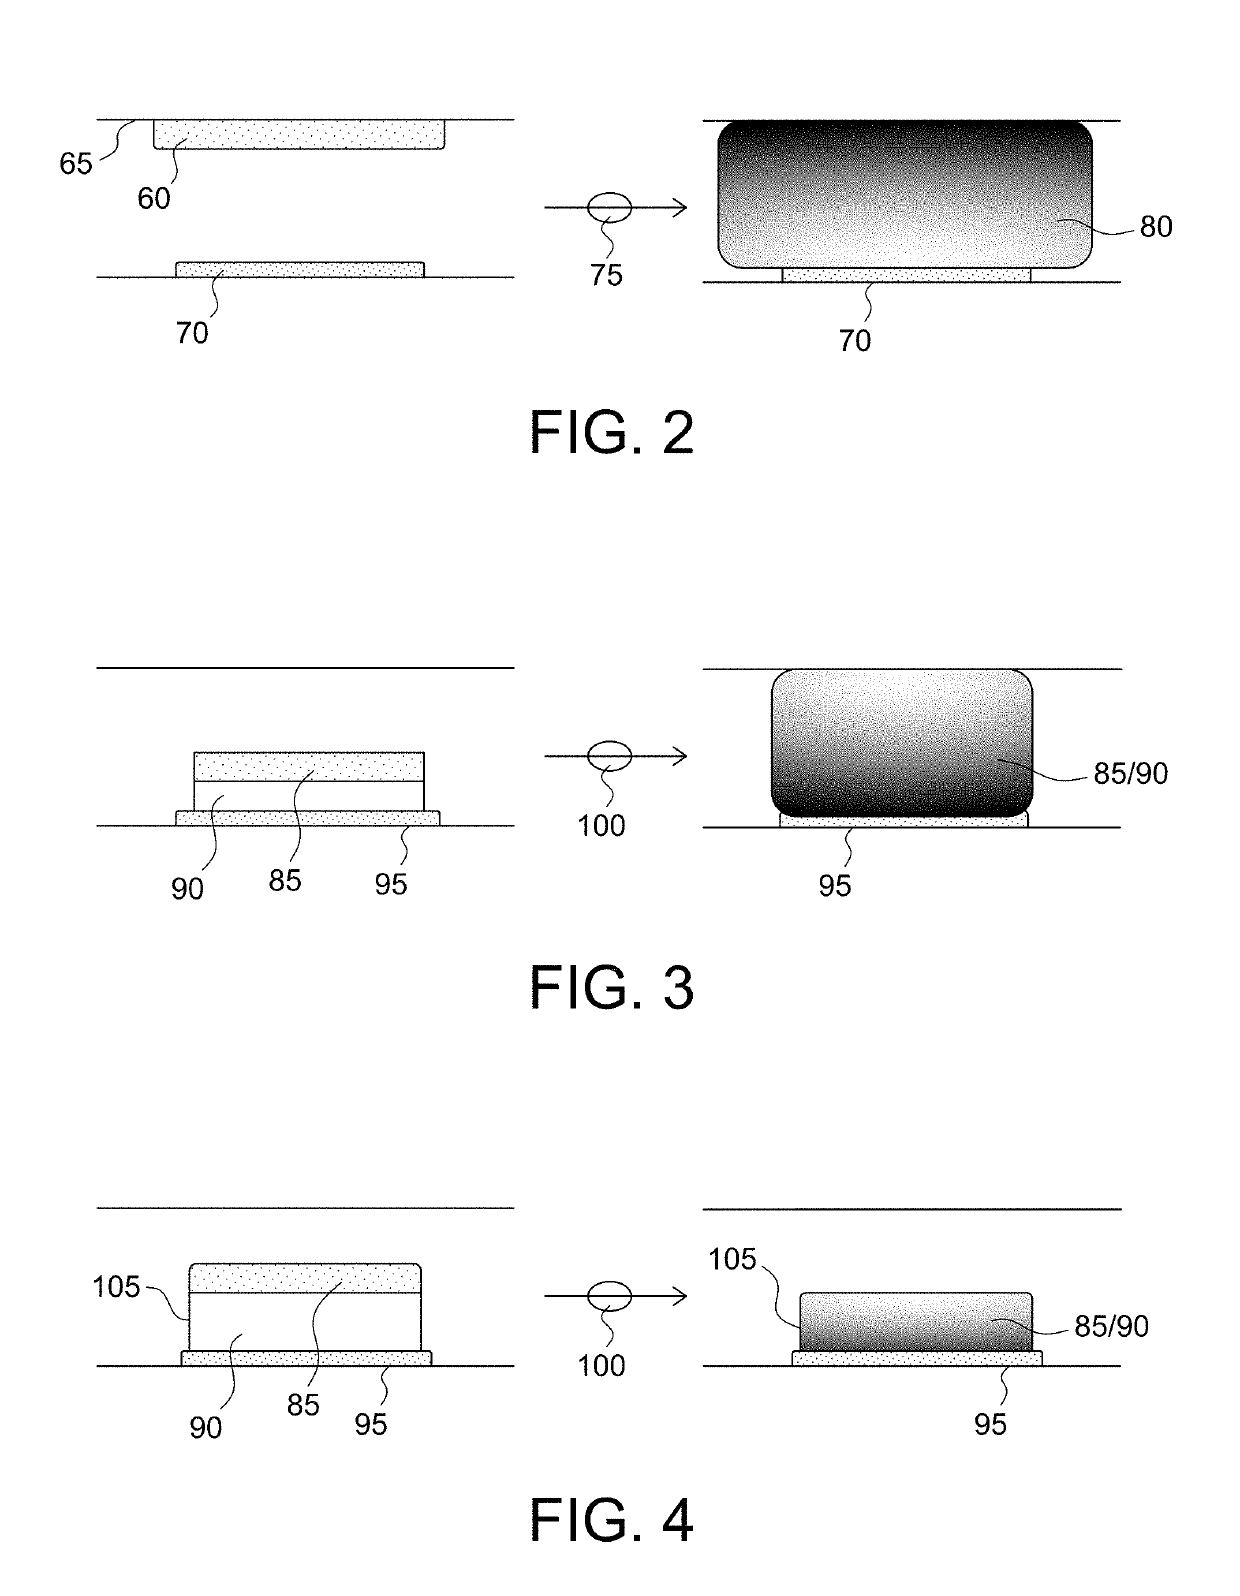 Microfabricated device with micro-environment sensors for assaying coagulation in fluid samples